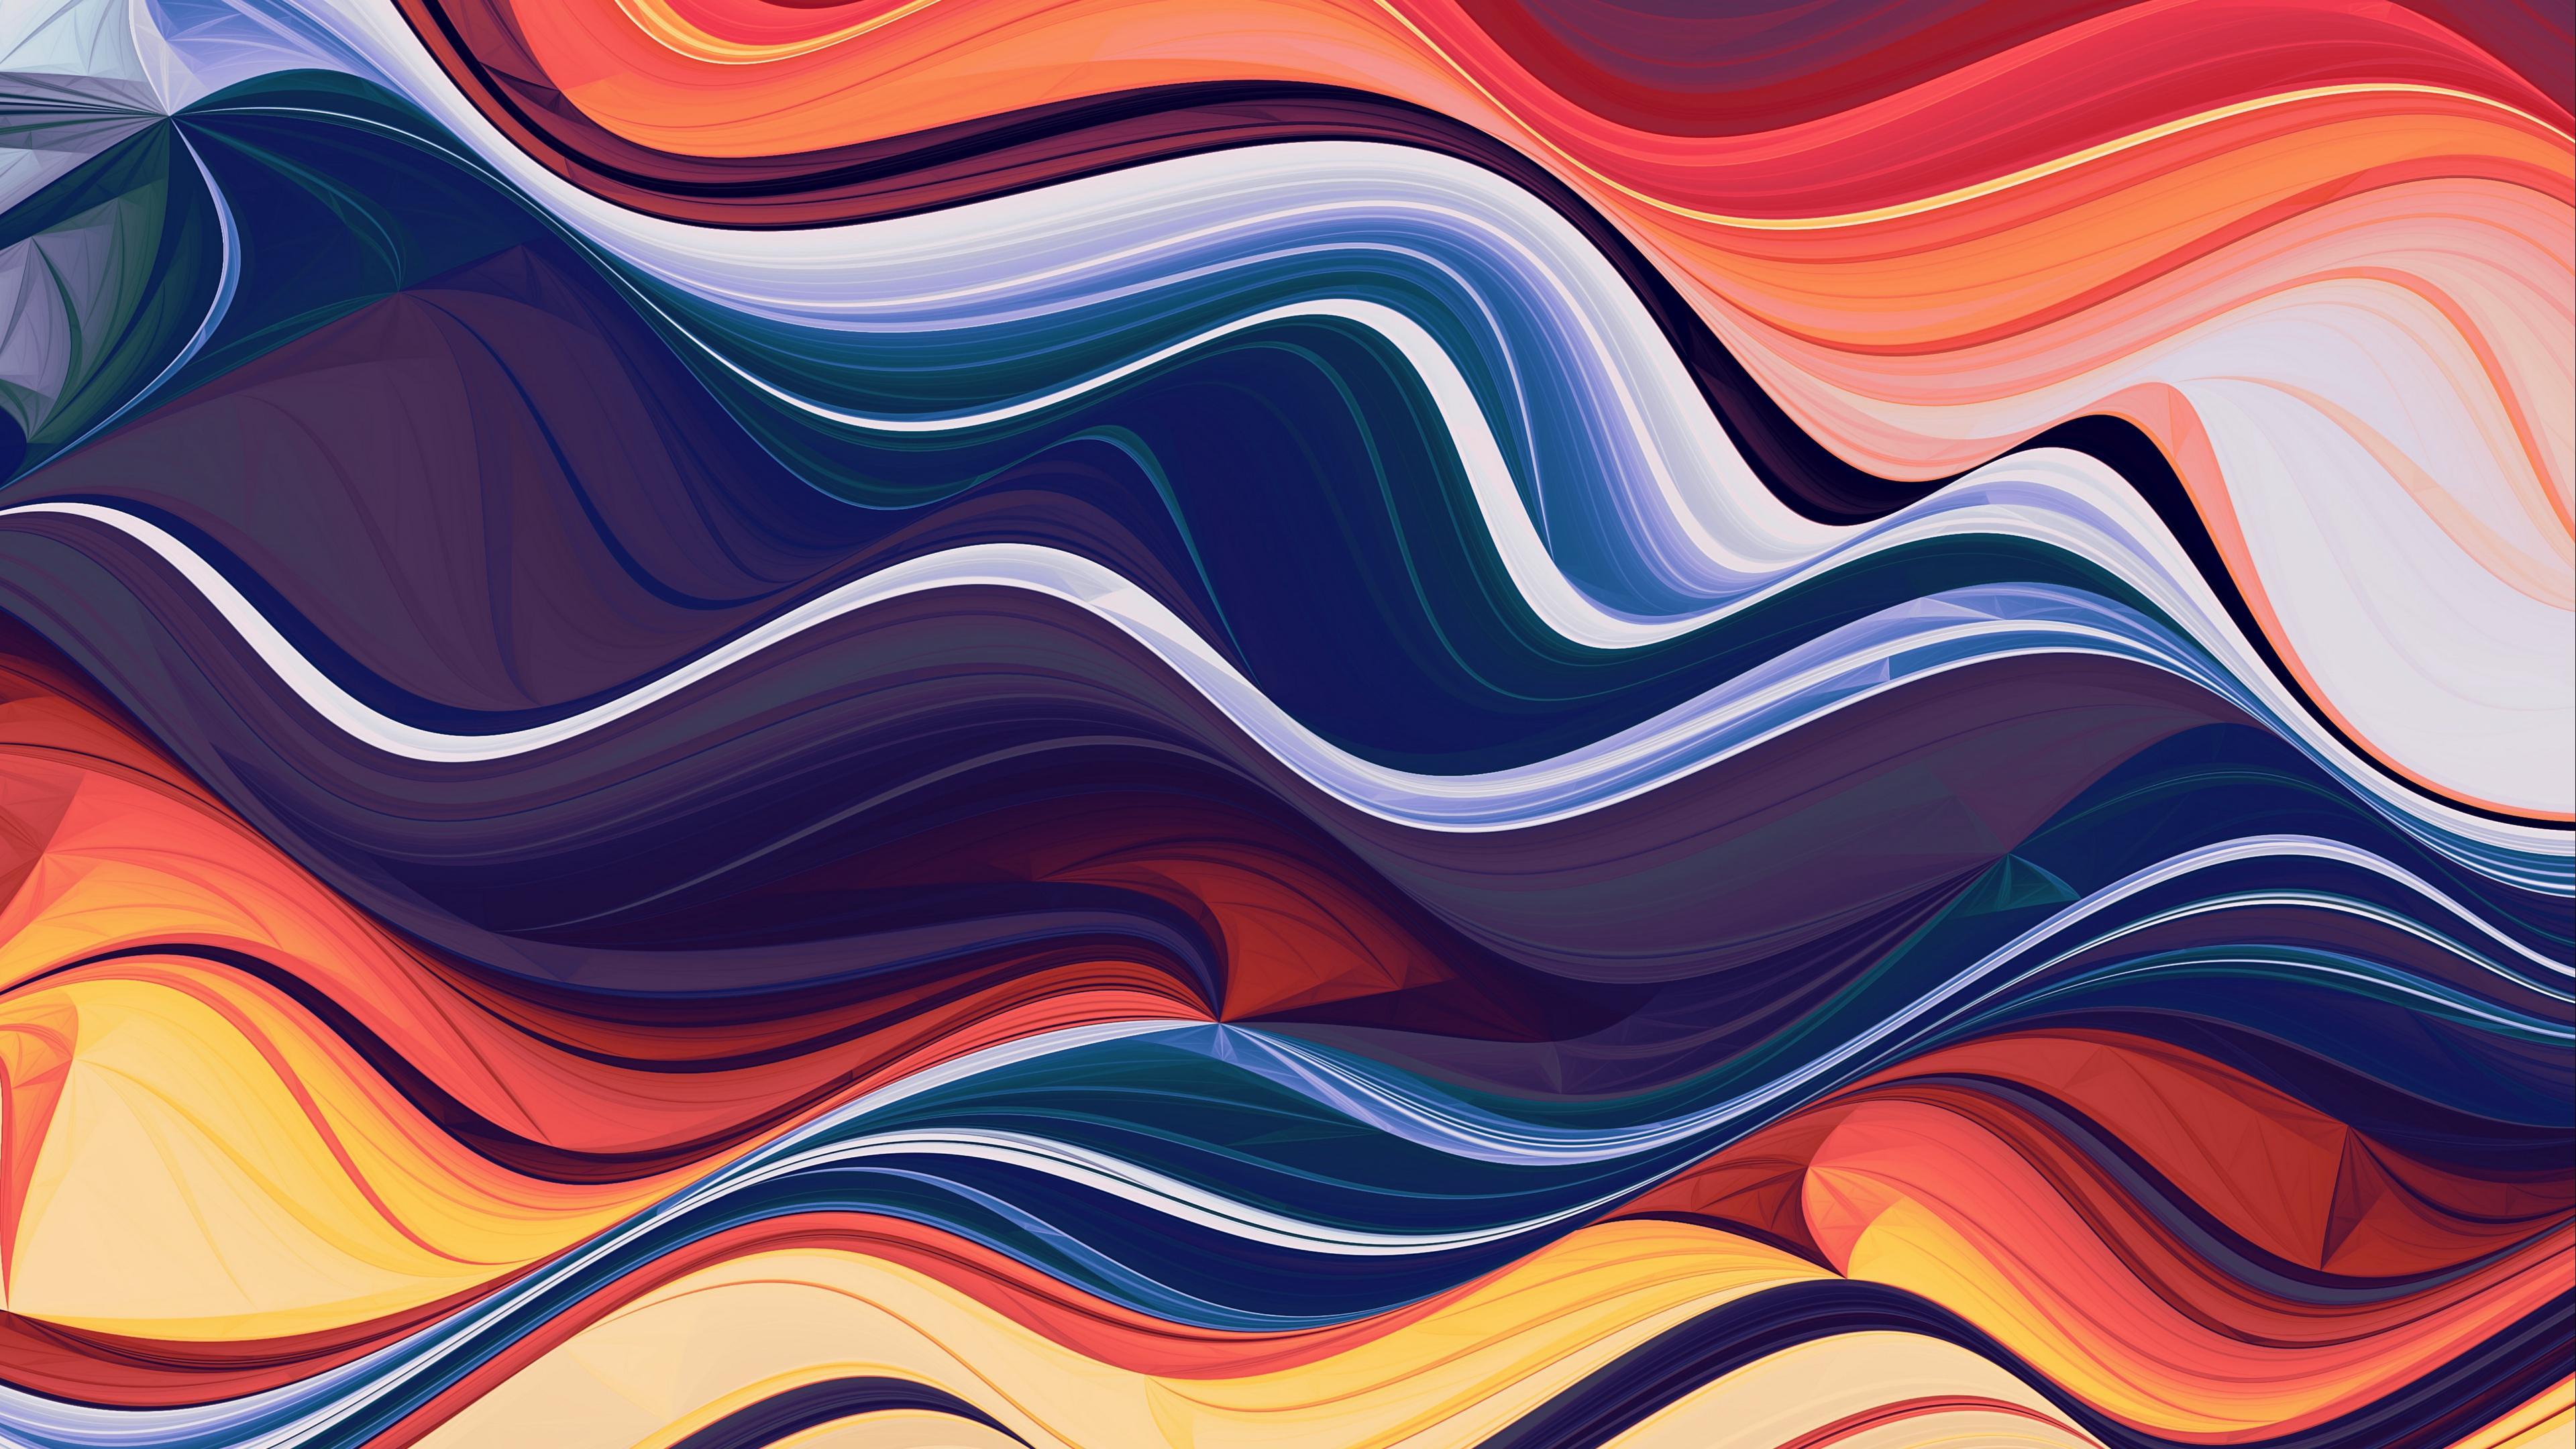 Download wallpaper 3840x2160 waves, colorful, abstraction, lines 4k